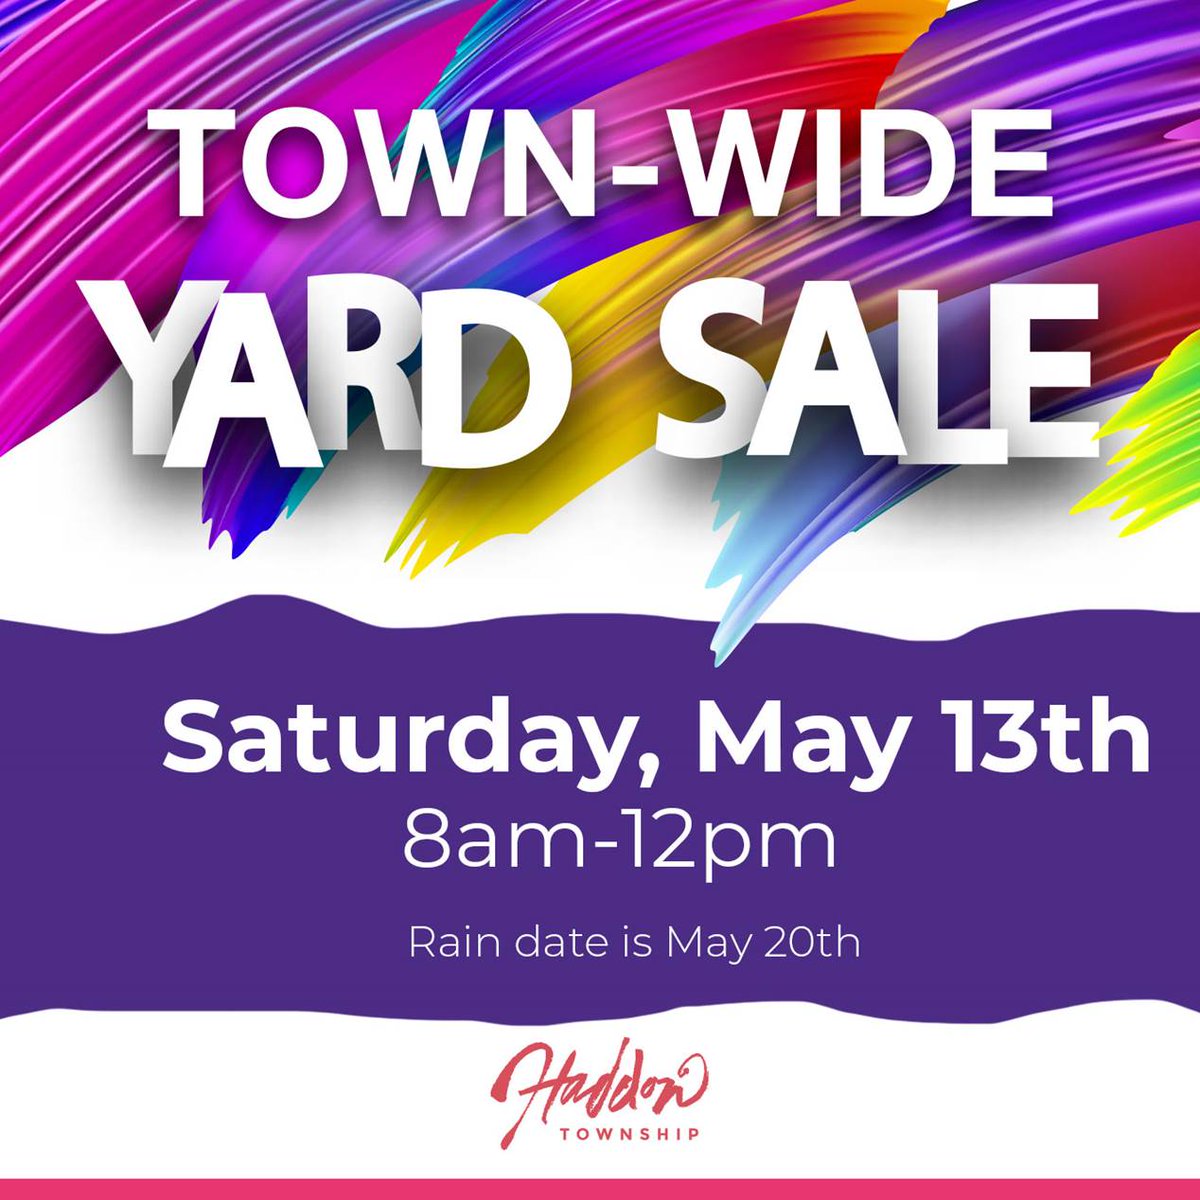 Haddon Township will turn into a bargain hunter’s paradise on Saturday, May 11th  for the Town-Wide Yard Sale! Check out this year’s list of participants in comments.    #HaddonTwpYardSale #HaddonTwp #ShopHaddon